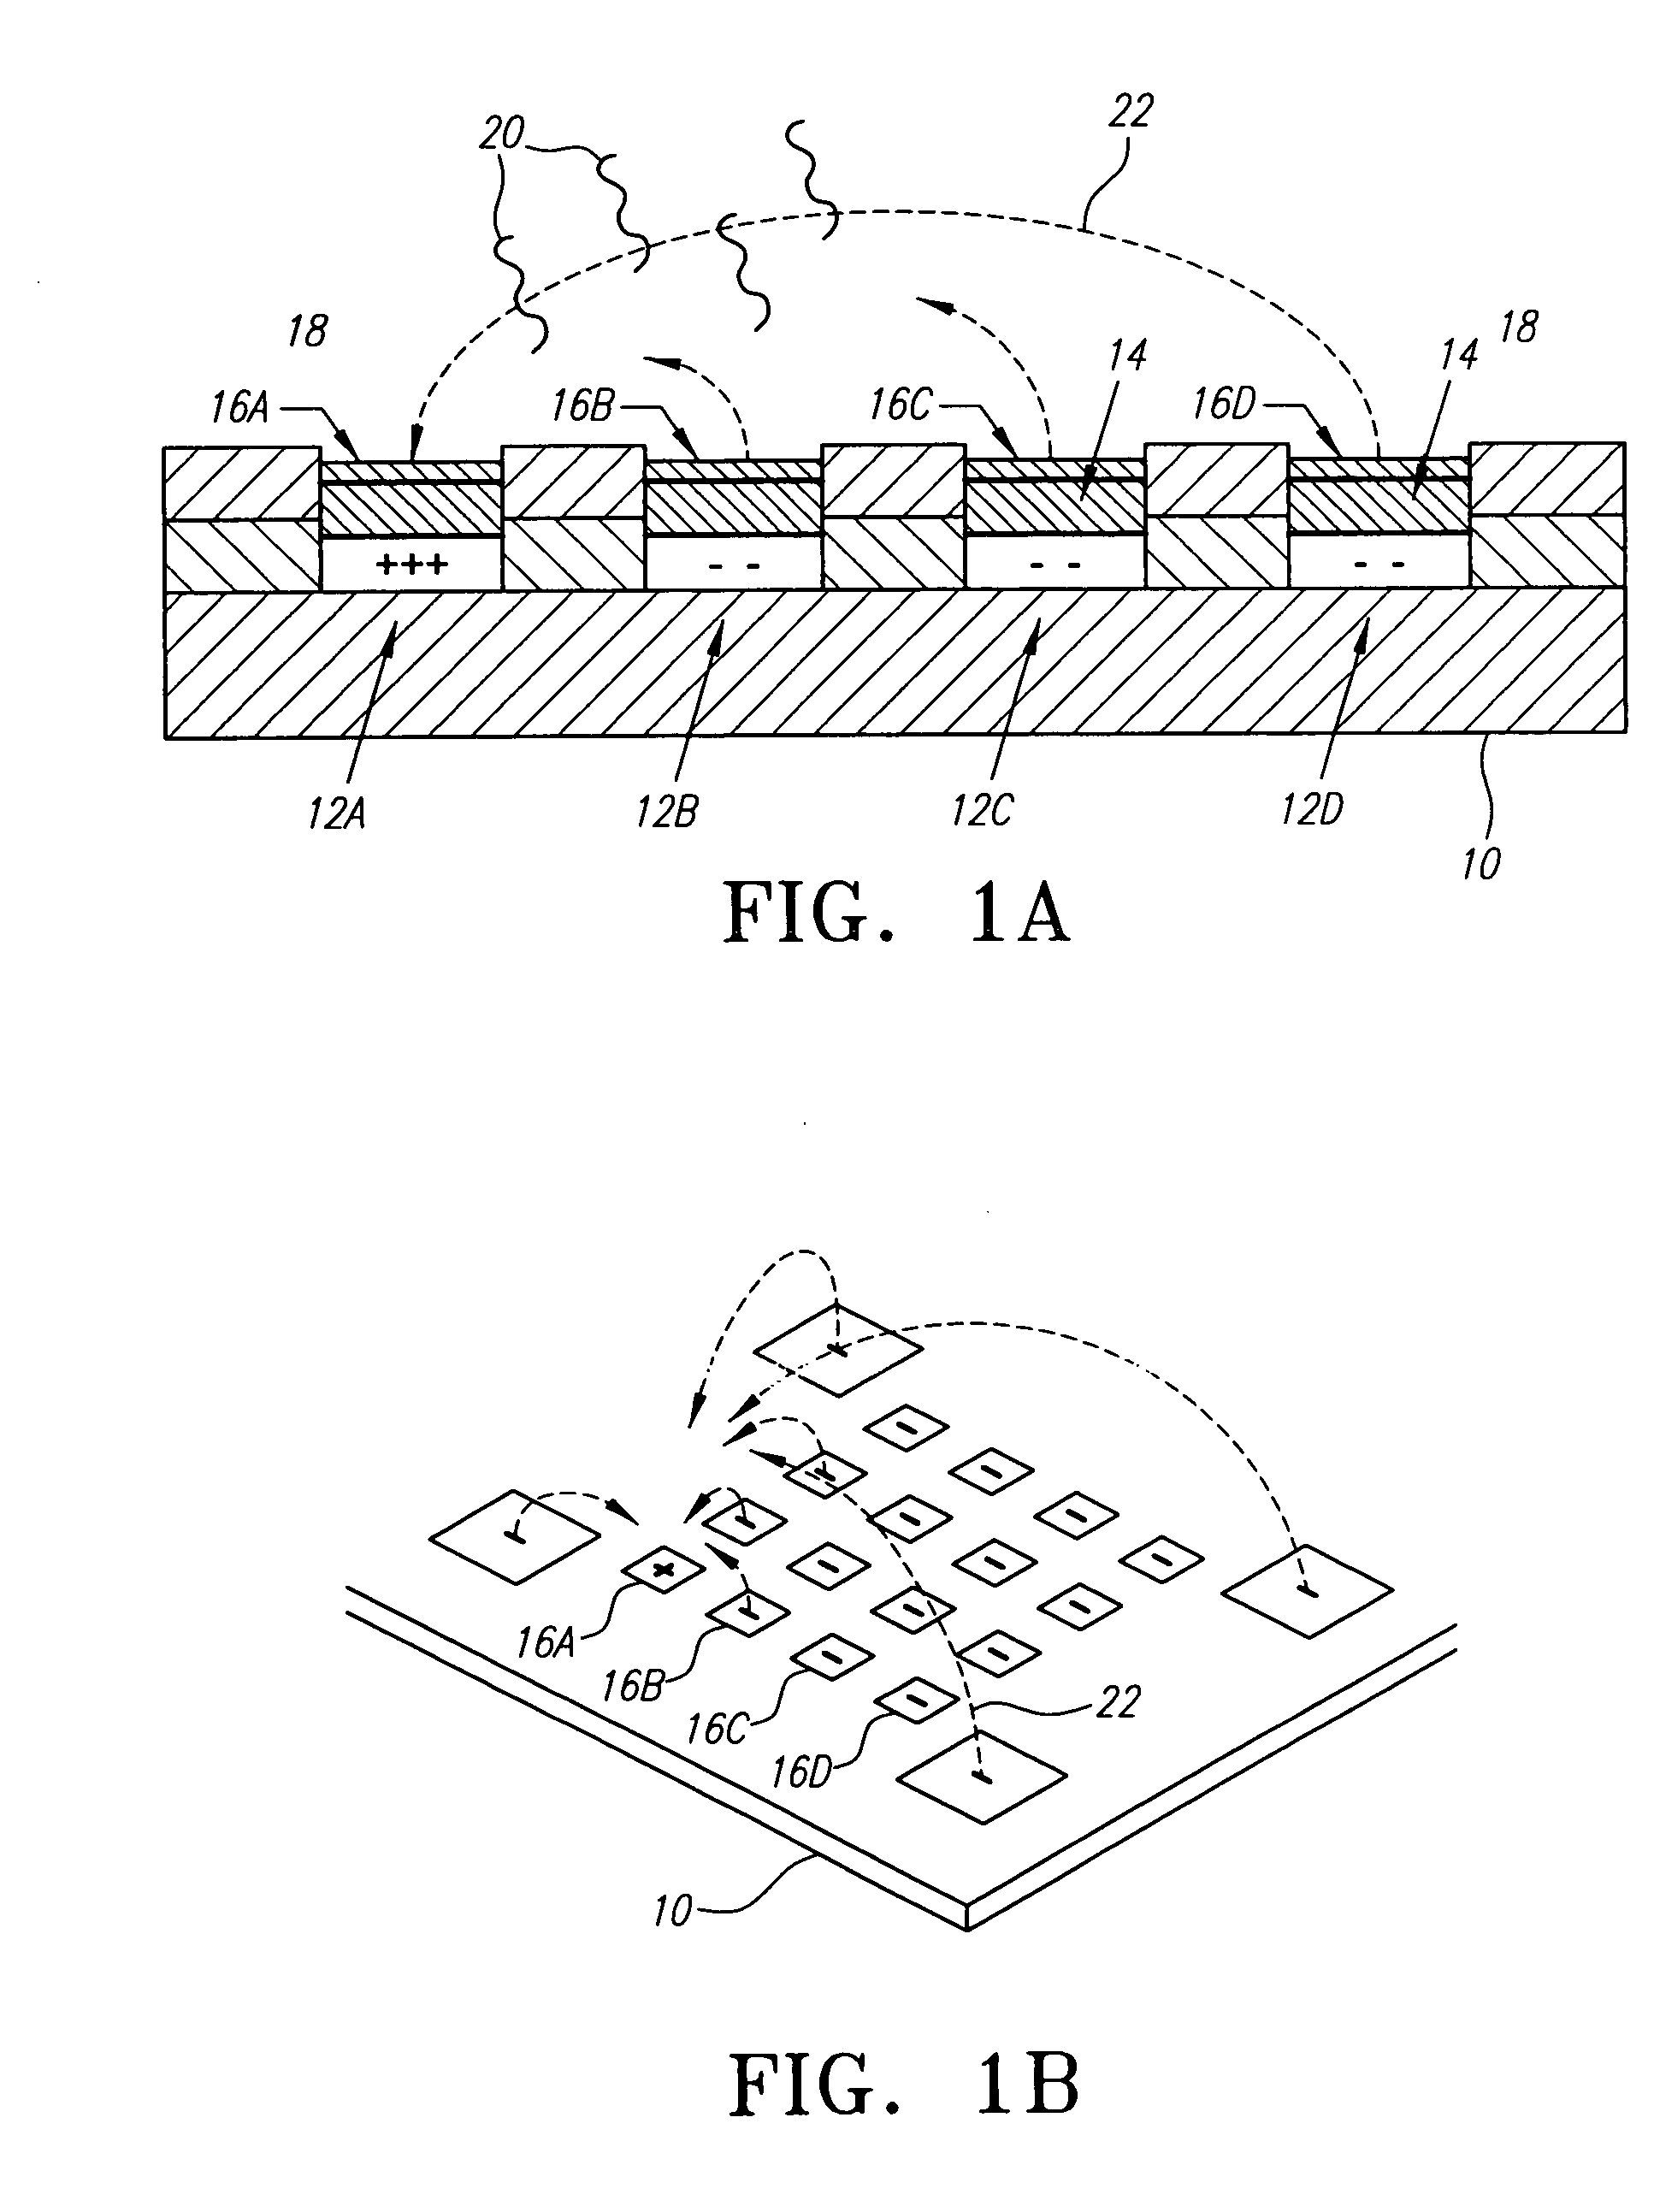 Amplification and separation of nucleic acid sequences using strand displacement amplification and bioelectronic microchip technology